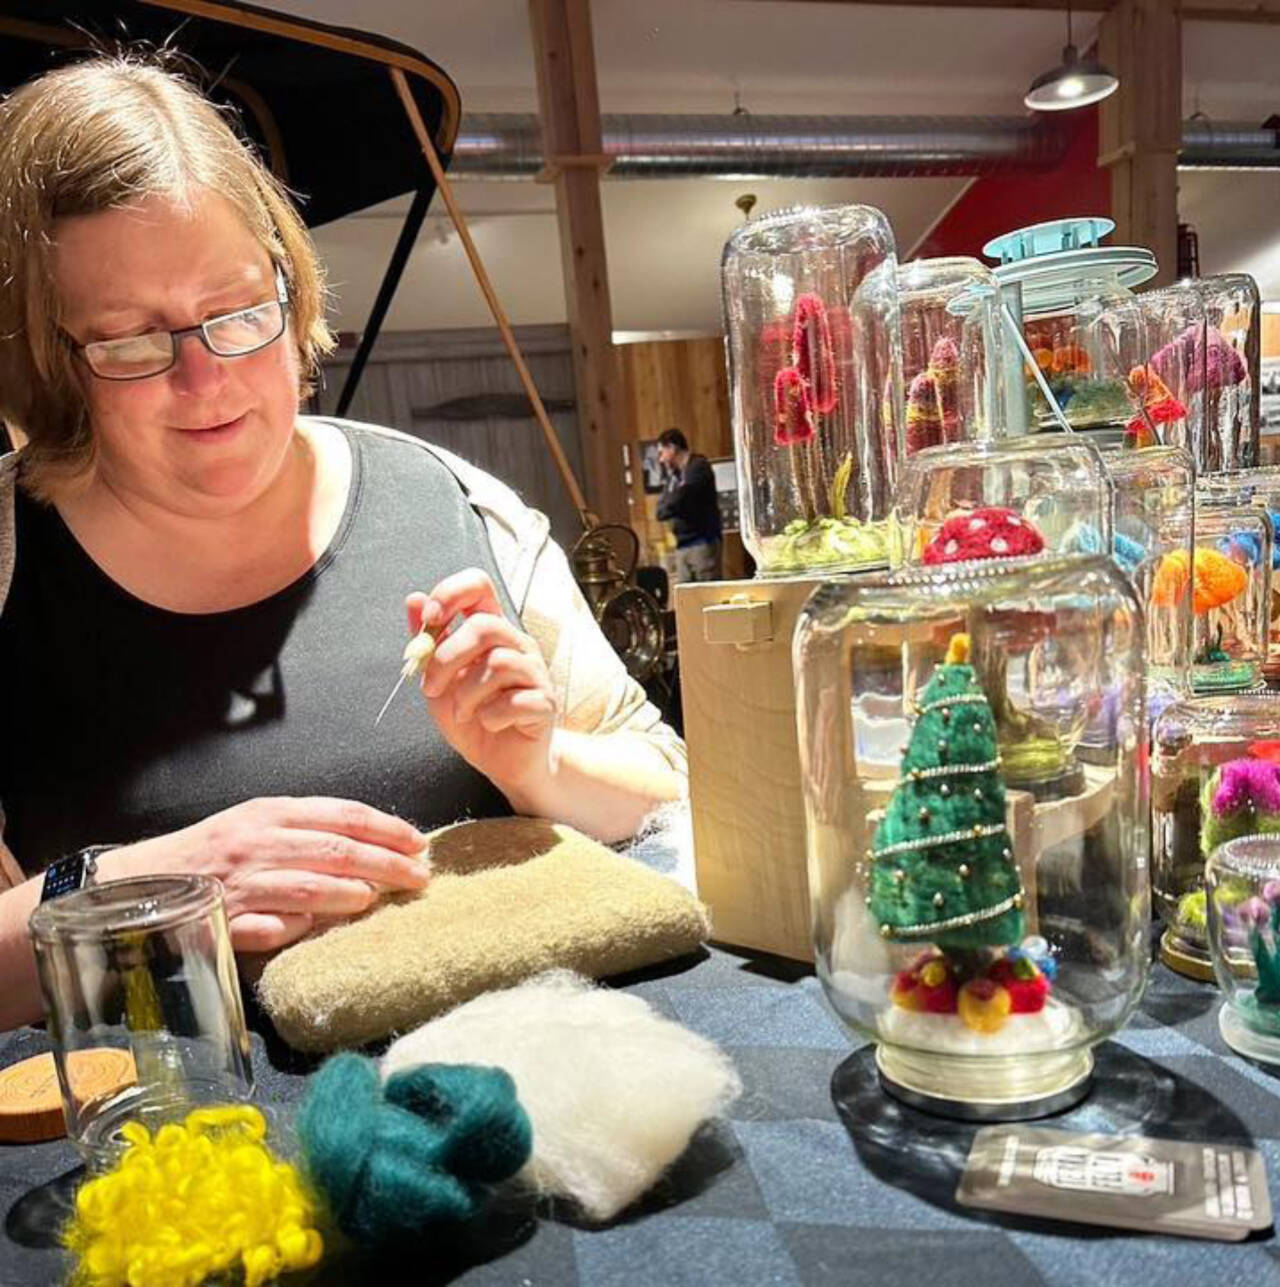 Submitted photo
Jennifer Harris, pictured here demonstrating needle felting, is one of several artists participating in the Fiber Arts Festival “Interlaced Lore – Adventure, Fellowship, & Perseverance” exhibition’s final day at Sequim Museum & Arts on Saturday, Nov. 26.